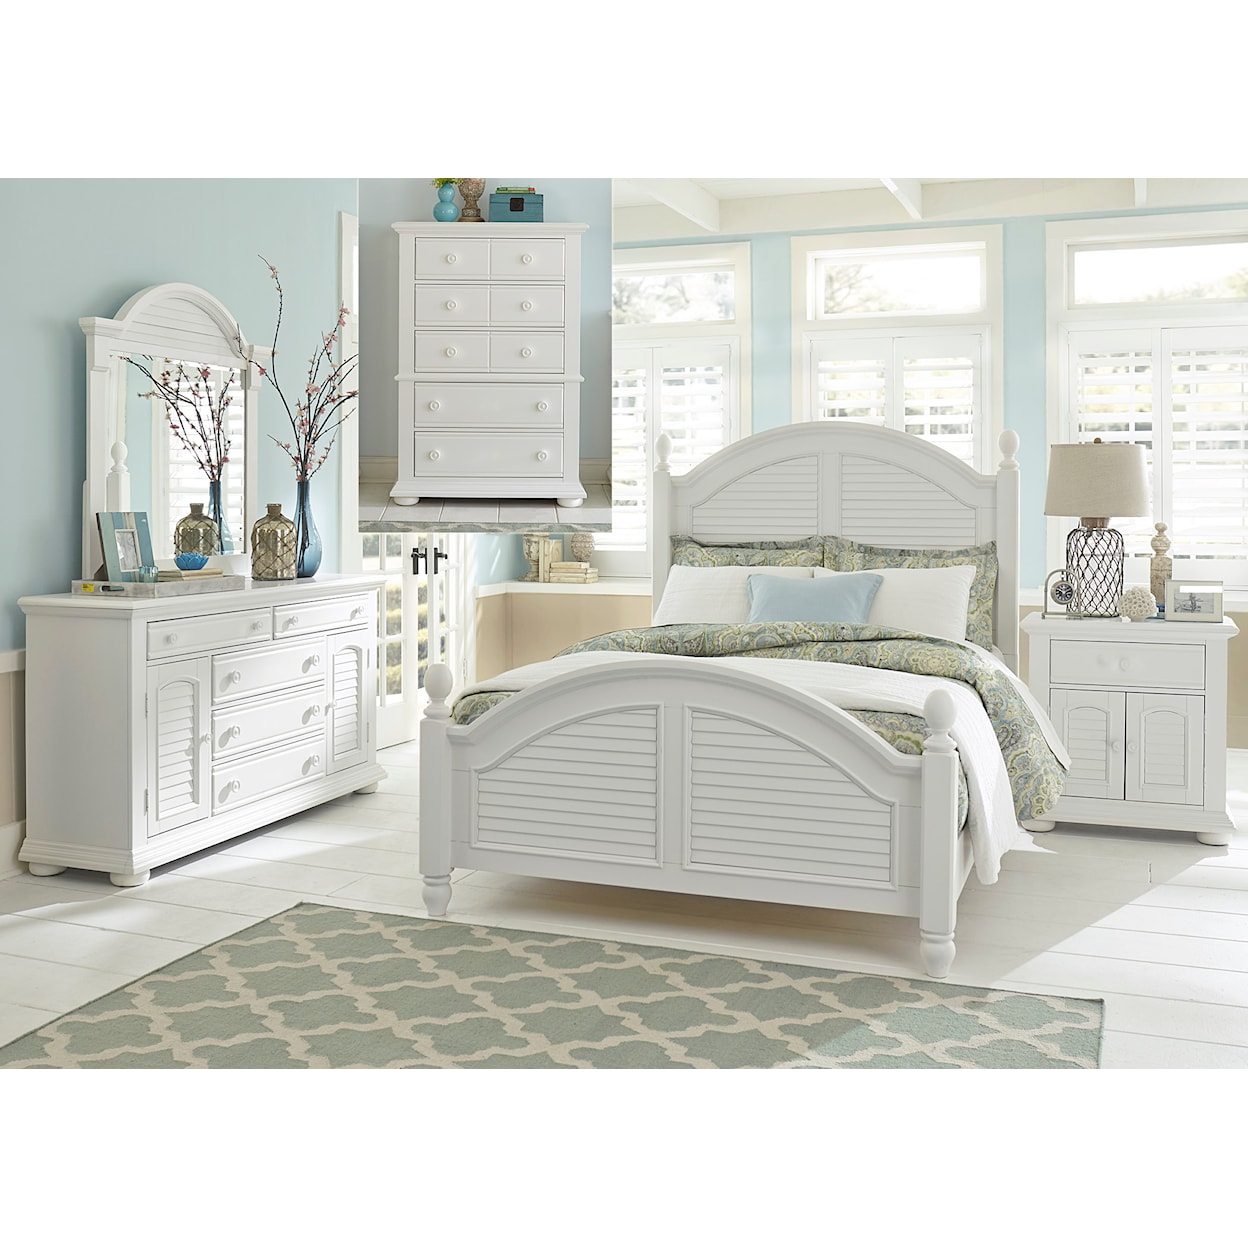 Liberty Furniture Summer House King Bedroom Group